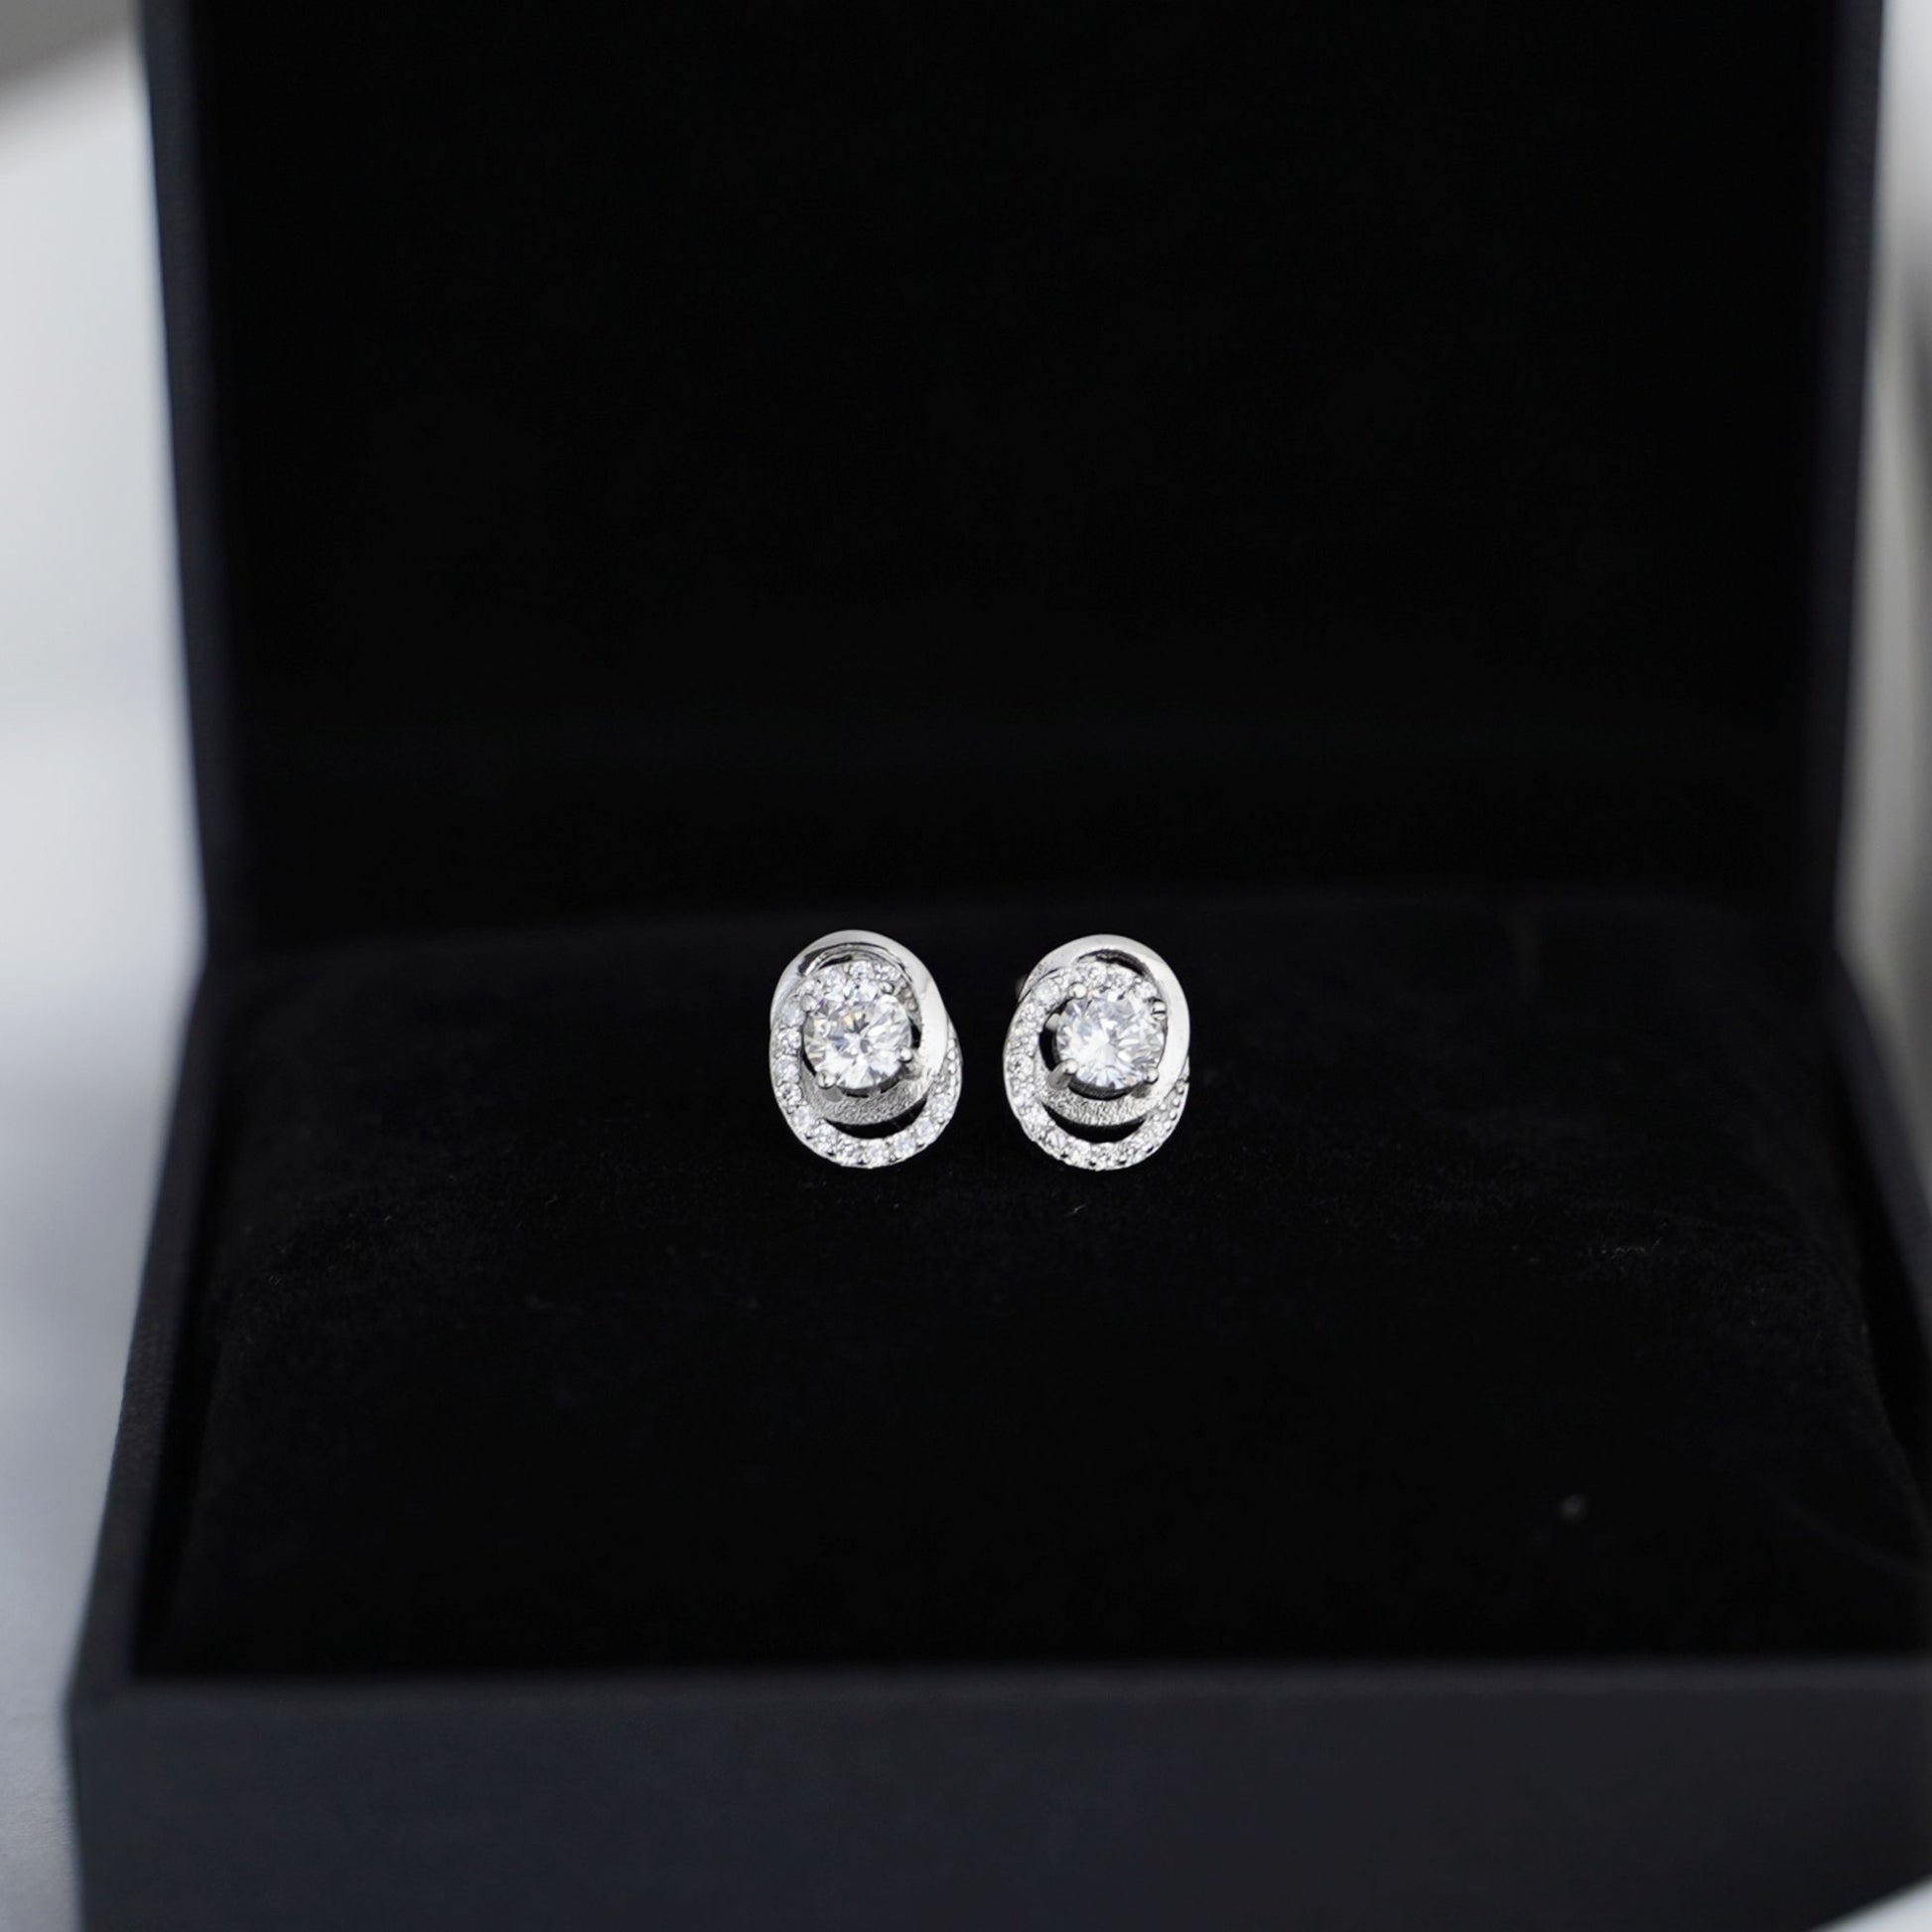 Stunning Rhodium-Plated Sterling Silver Halo Stud Earrings with 5mm CZ Ovals - sugarkittenlondon